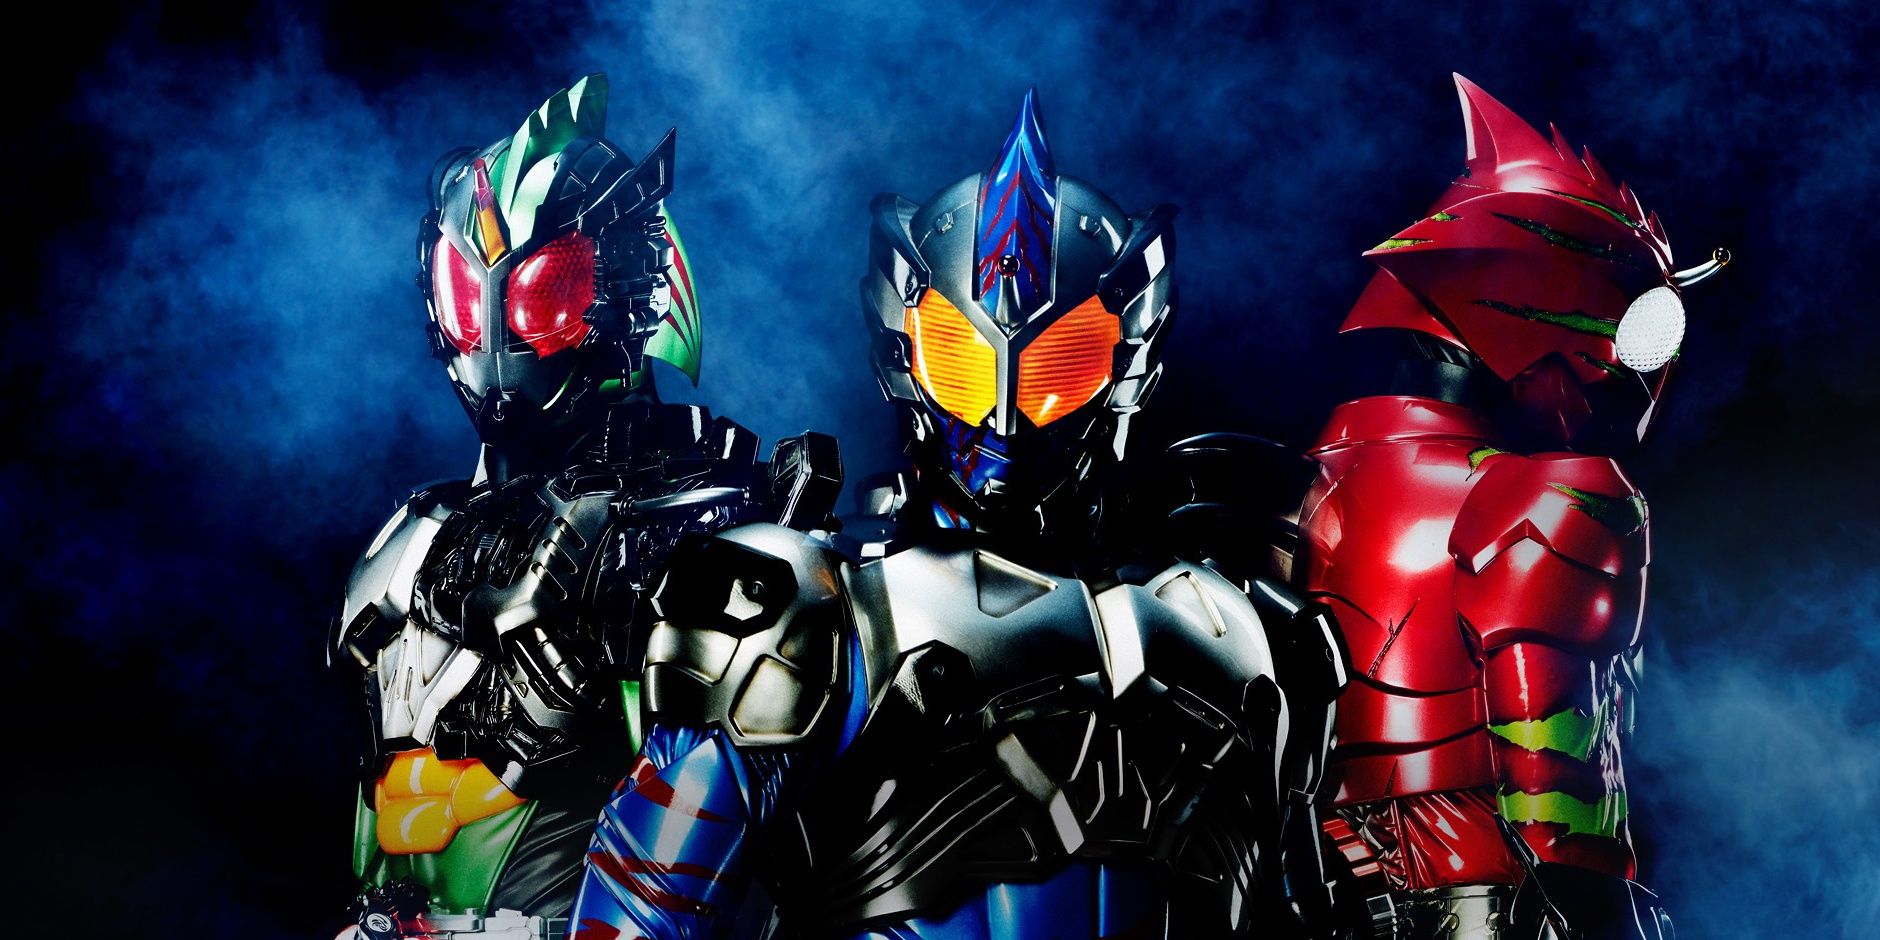 The three main suits in Kamen Rider Amazons